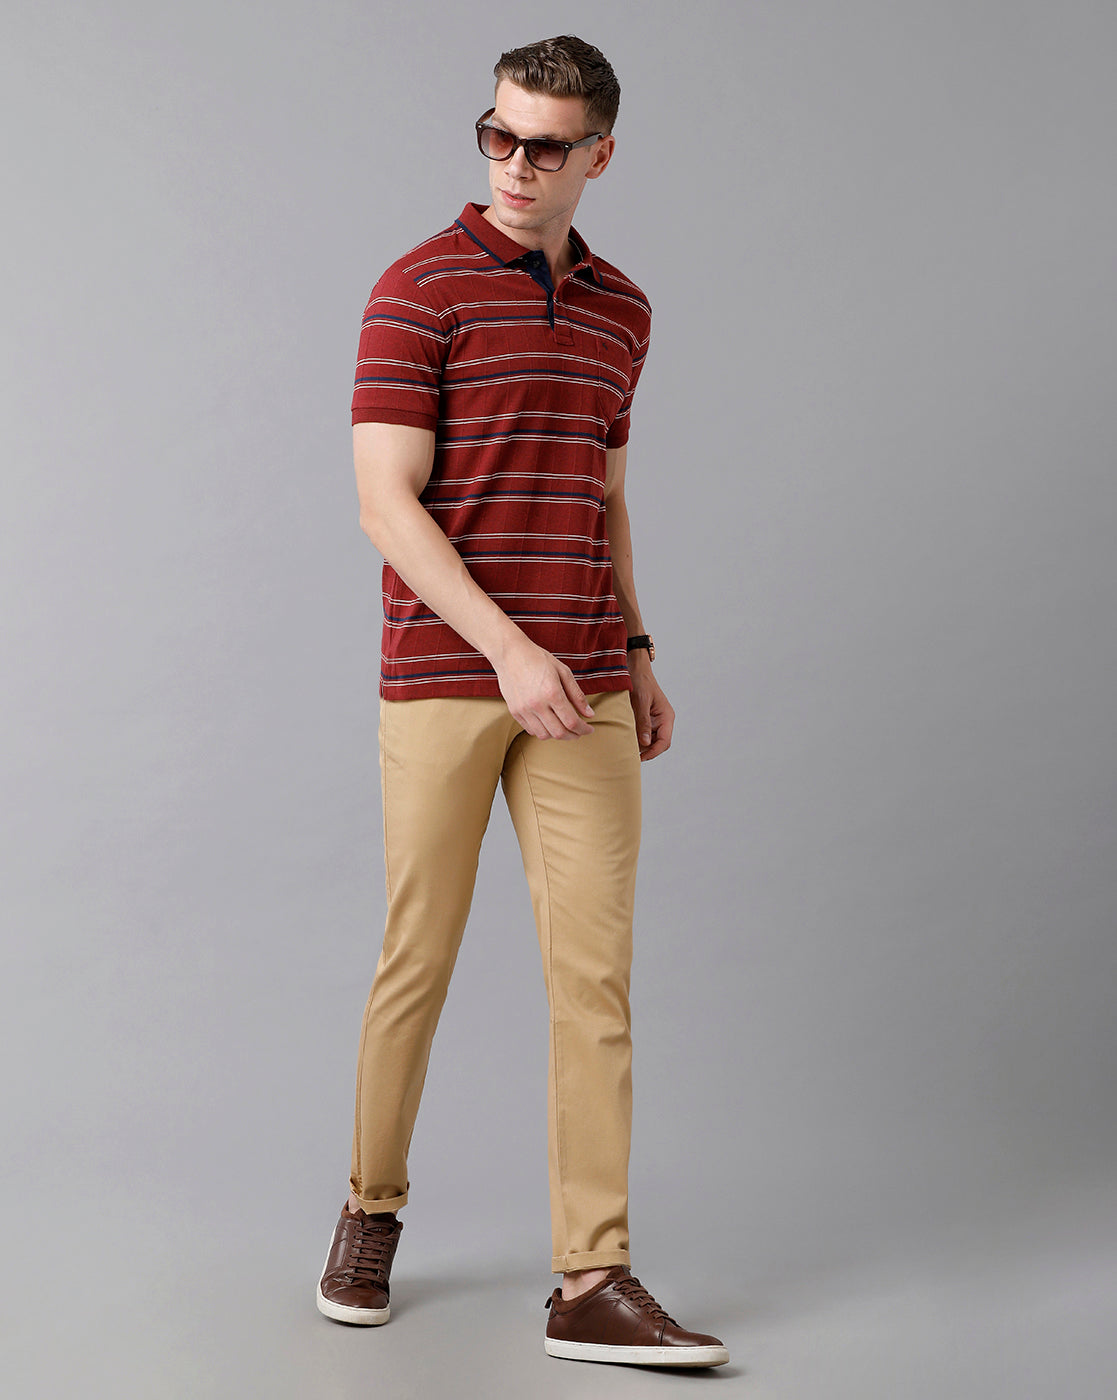 Classic Polo Men's Cotton Striped Half Sleeve Slim Fit Polo Neck Maroon Color T-Shirt | Trs - 94 B